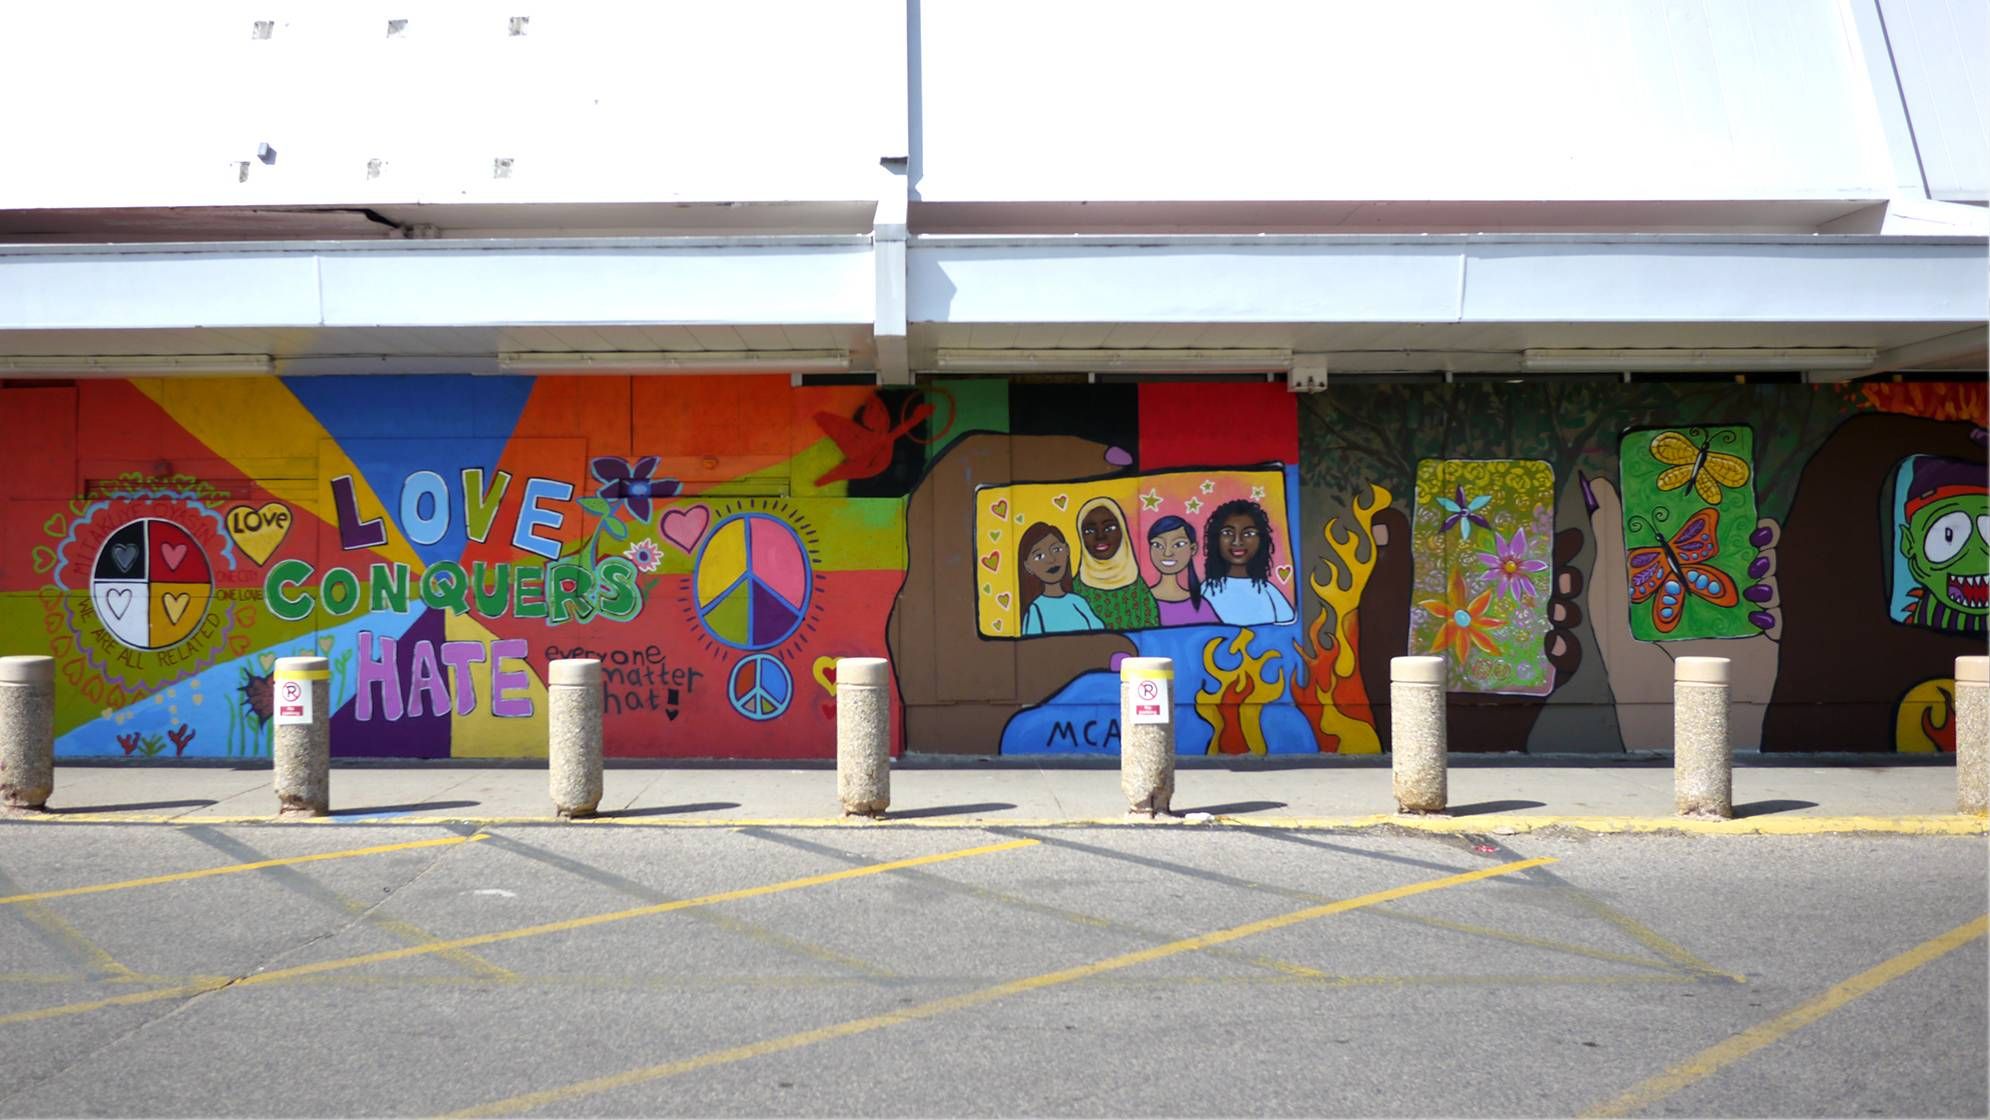 A colorful mural with the words "Love conquers hate."